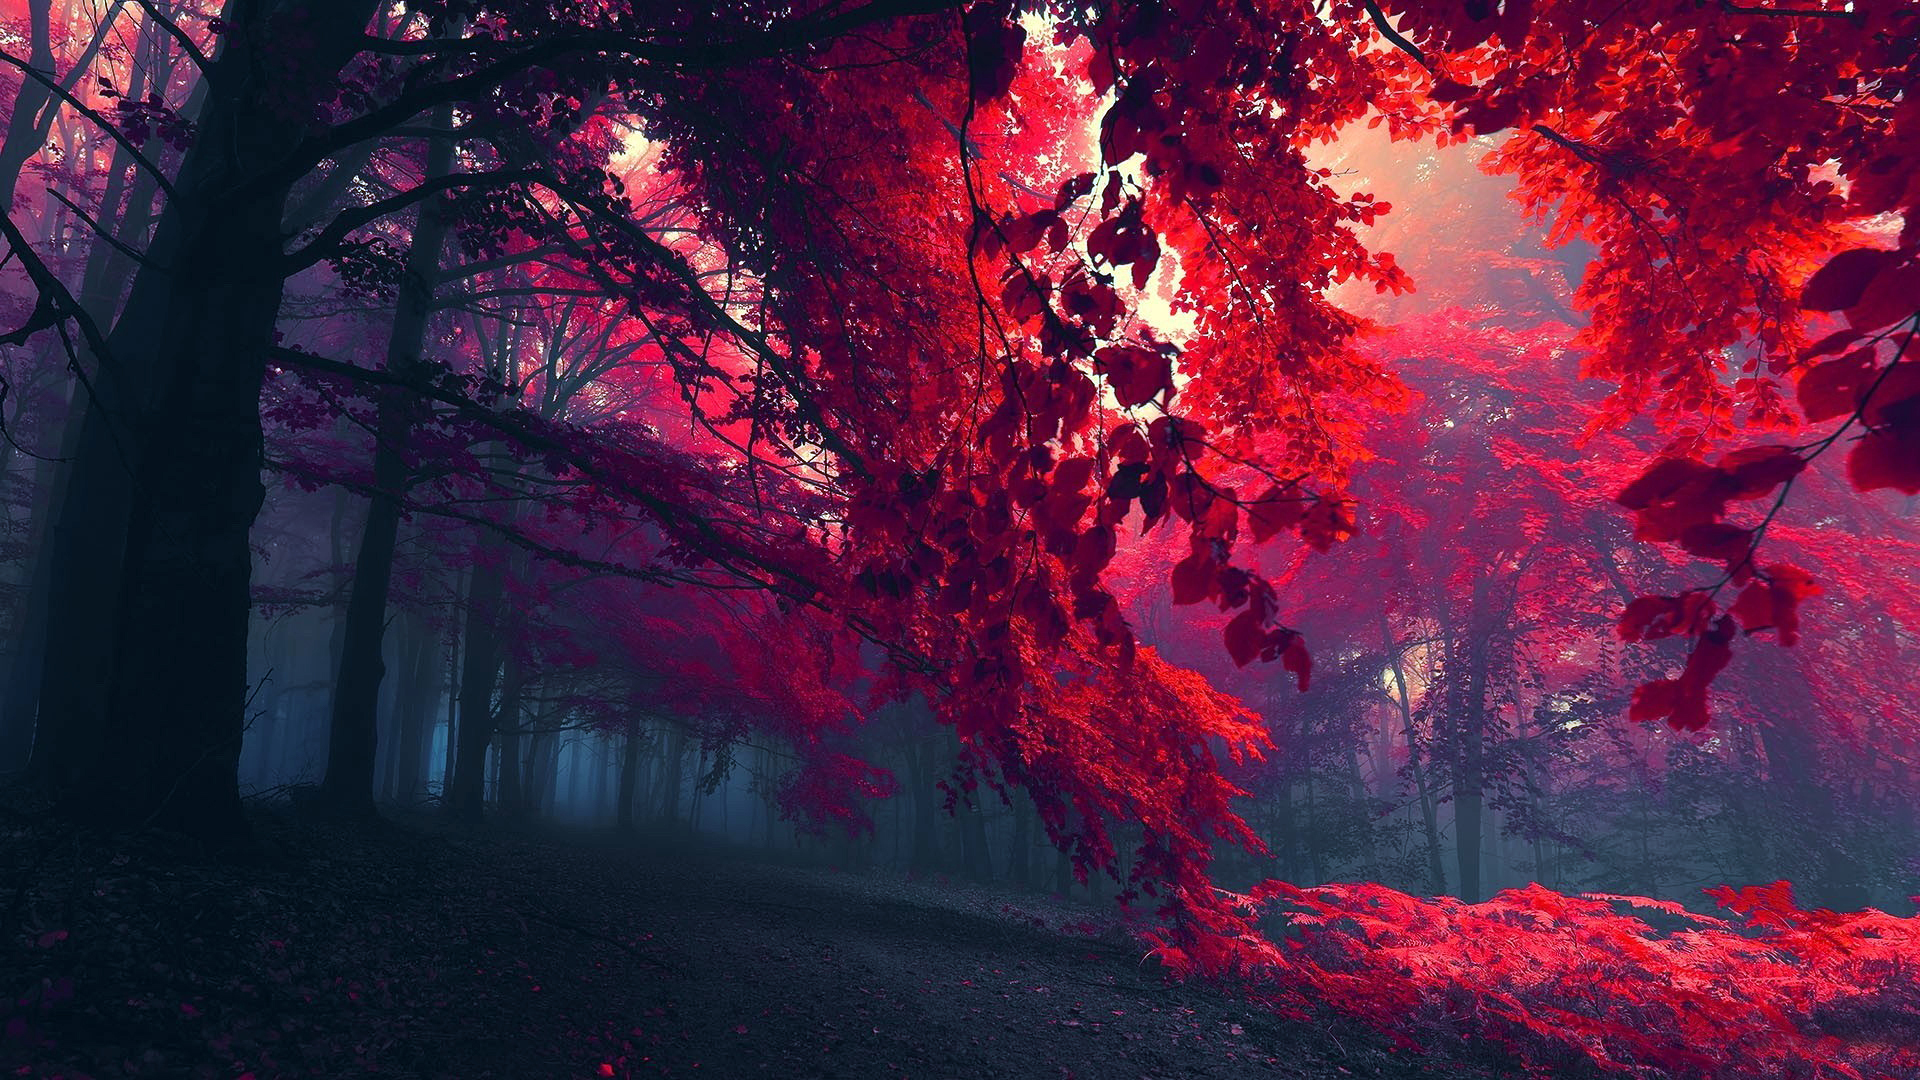 Nature___Seasons___Autumn_____Red_leaves_and_the_fog_087455_.jpg